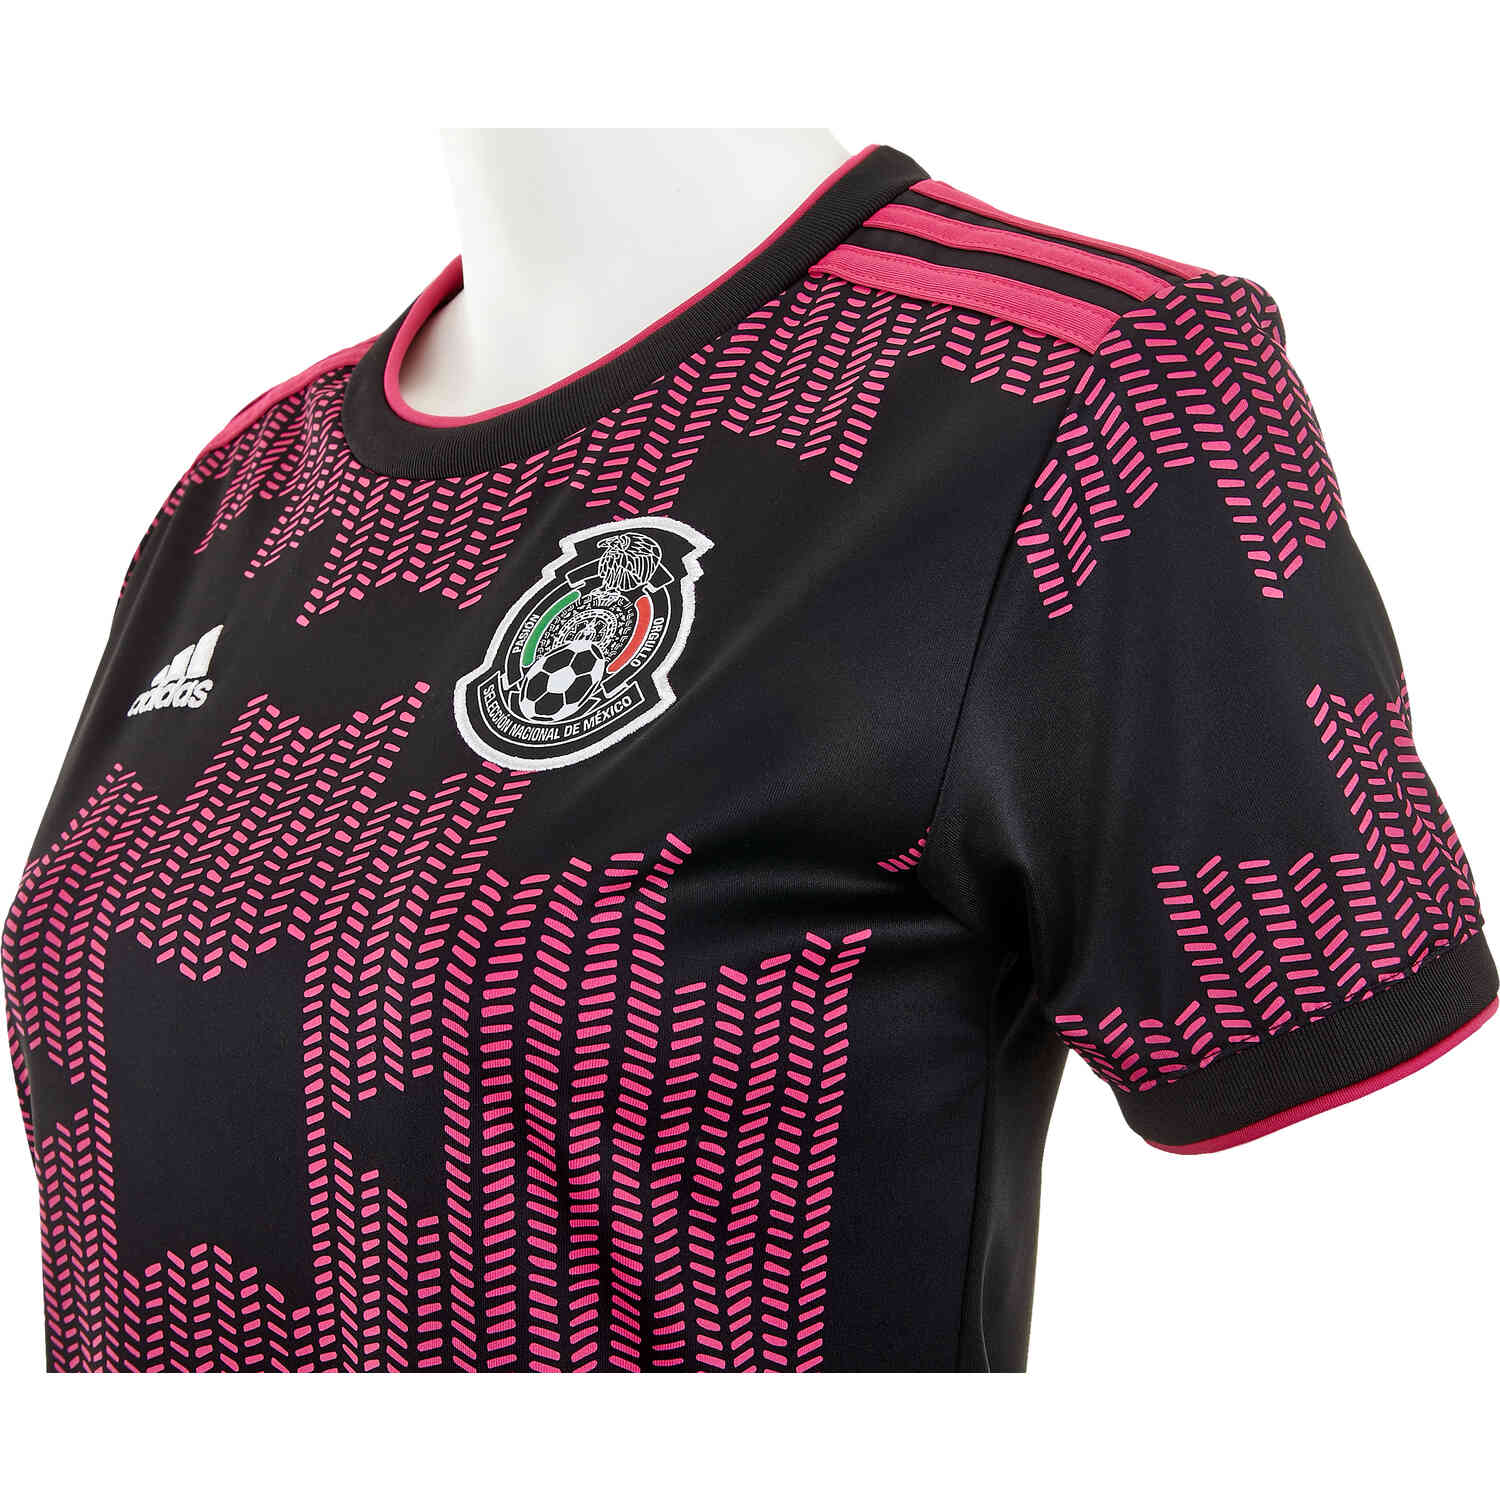 Women's MEXICO WORLD CUP Jersey Size L 